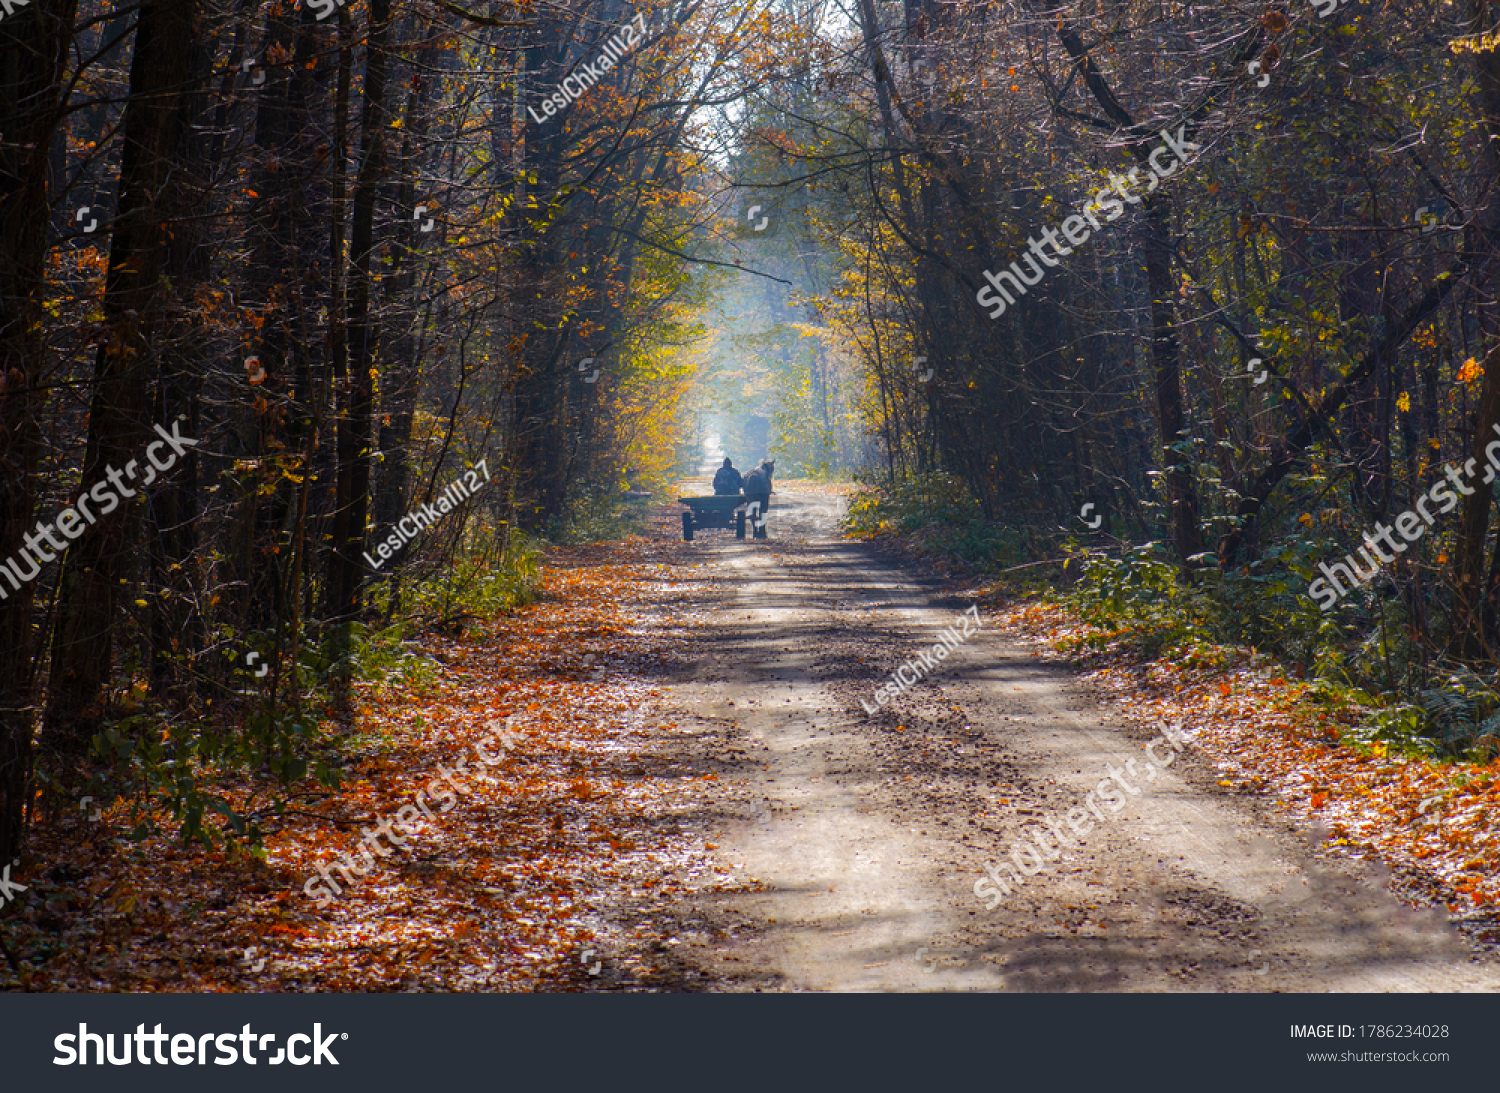 Ride in a horse drawn wagon in autumn woods with yellow leaves. Horse carriage on on autumn road #1786234028